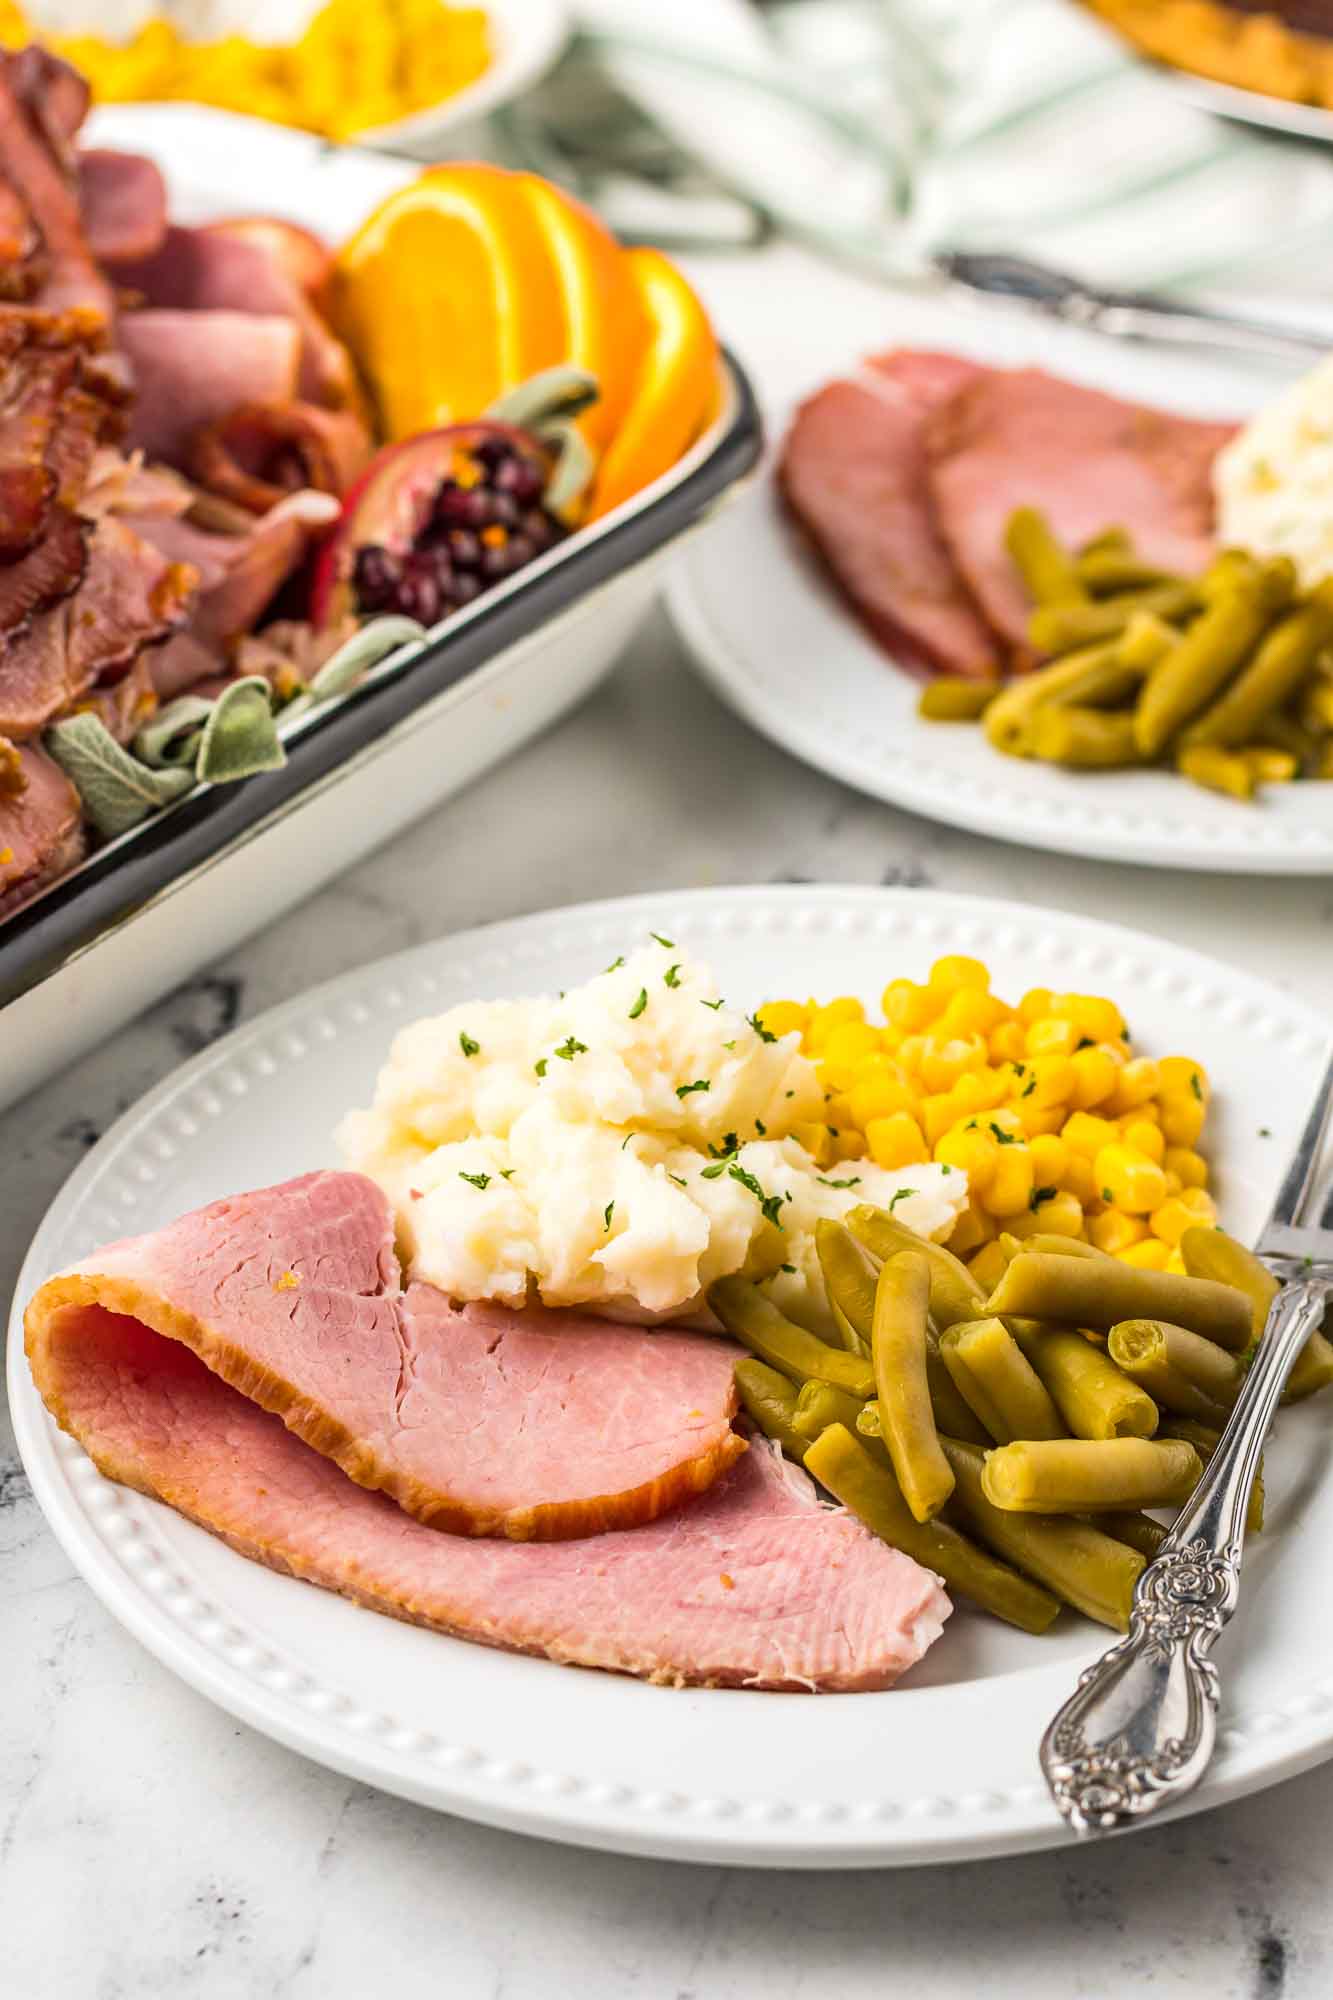 Plated slice of honey glazed ham with green beans, mashed potatoes, and corn.